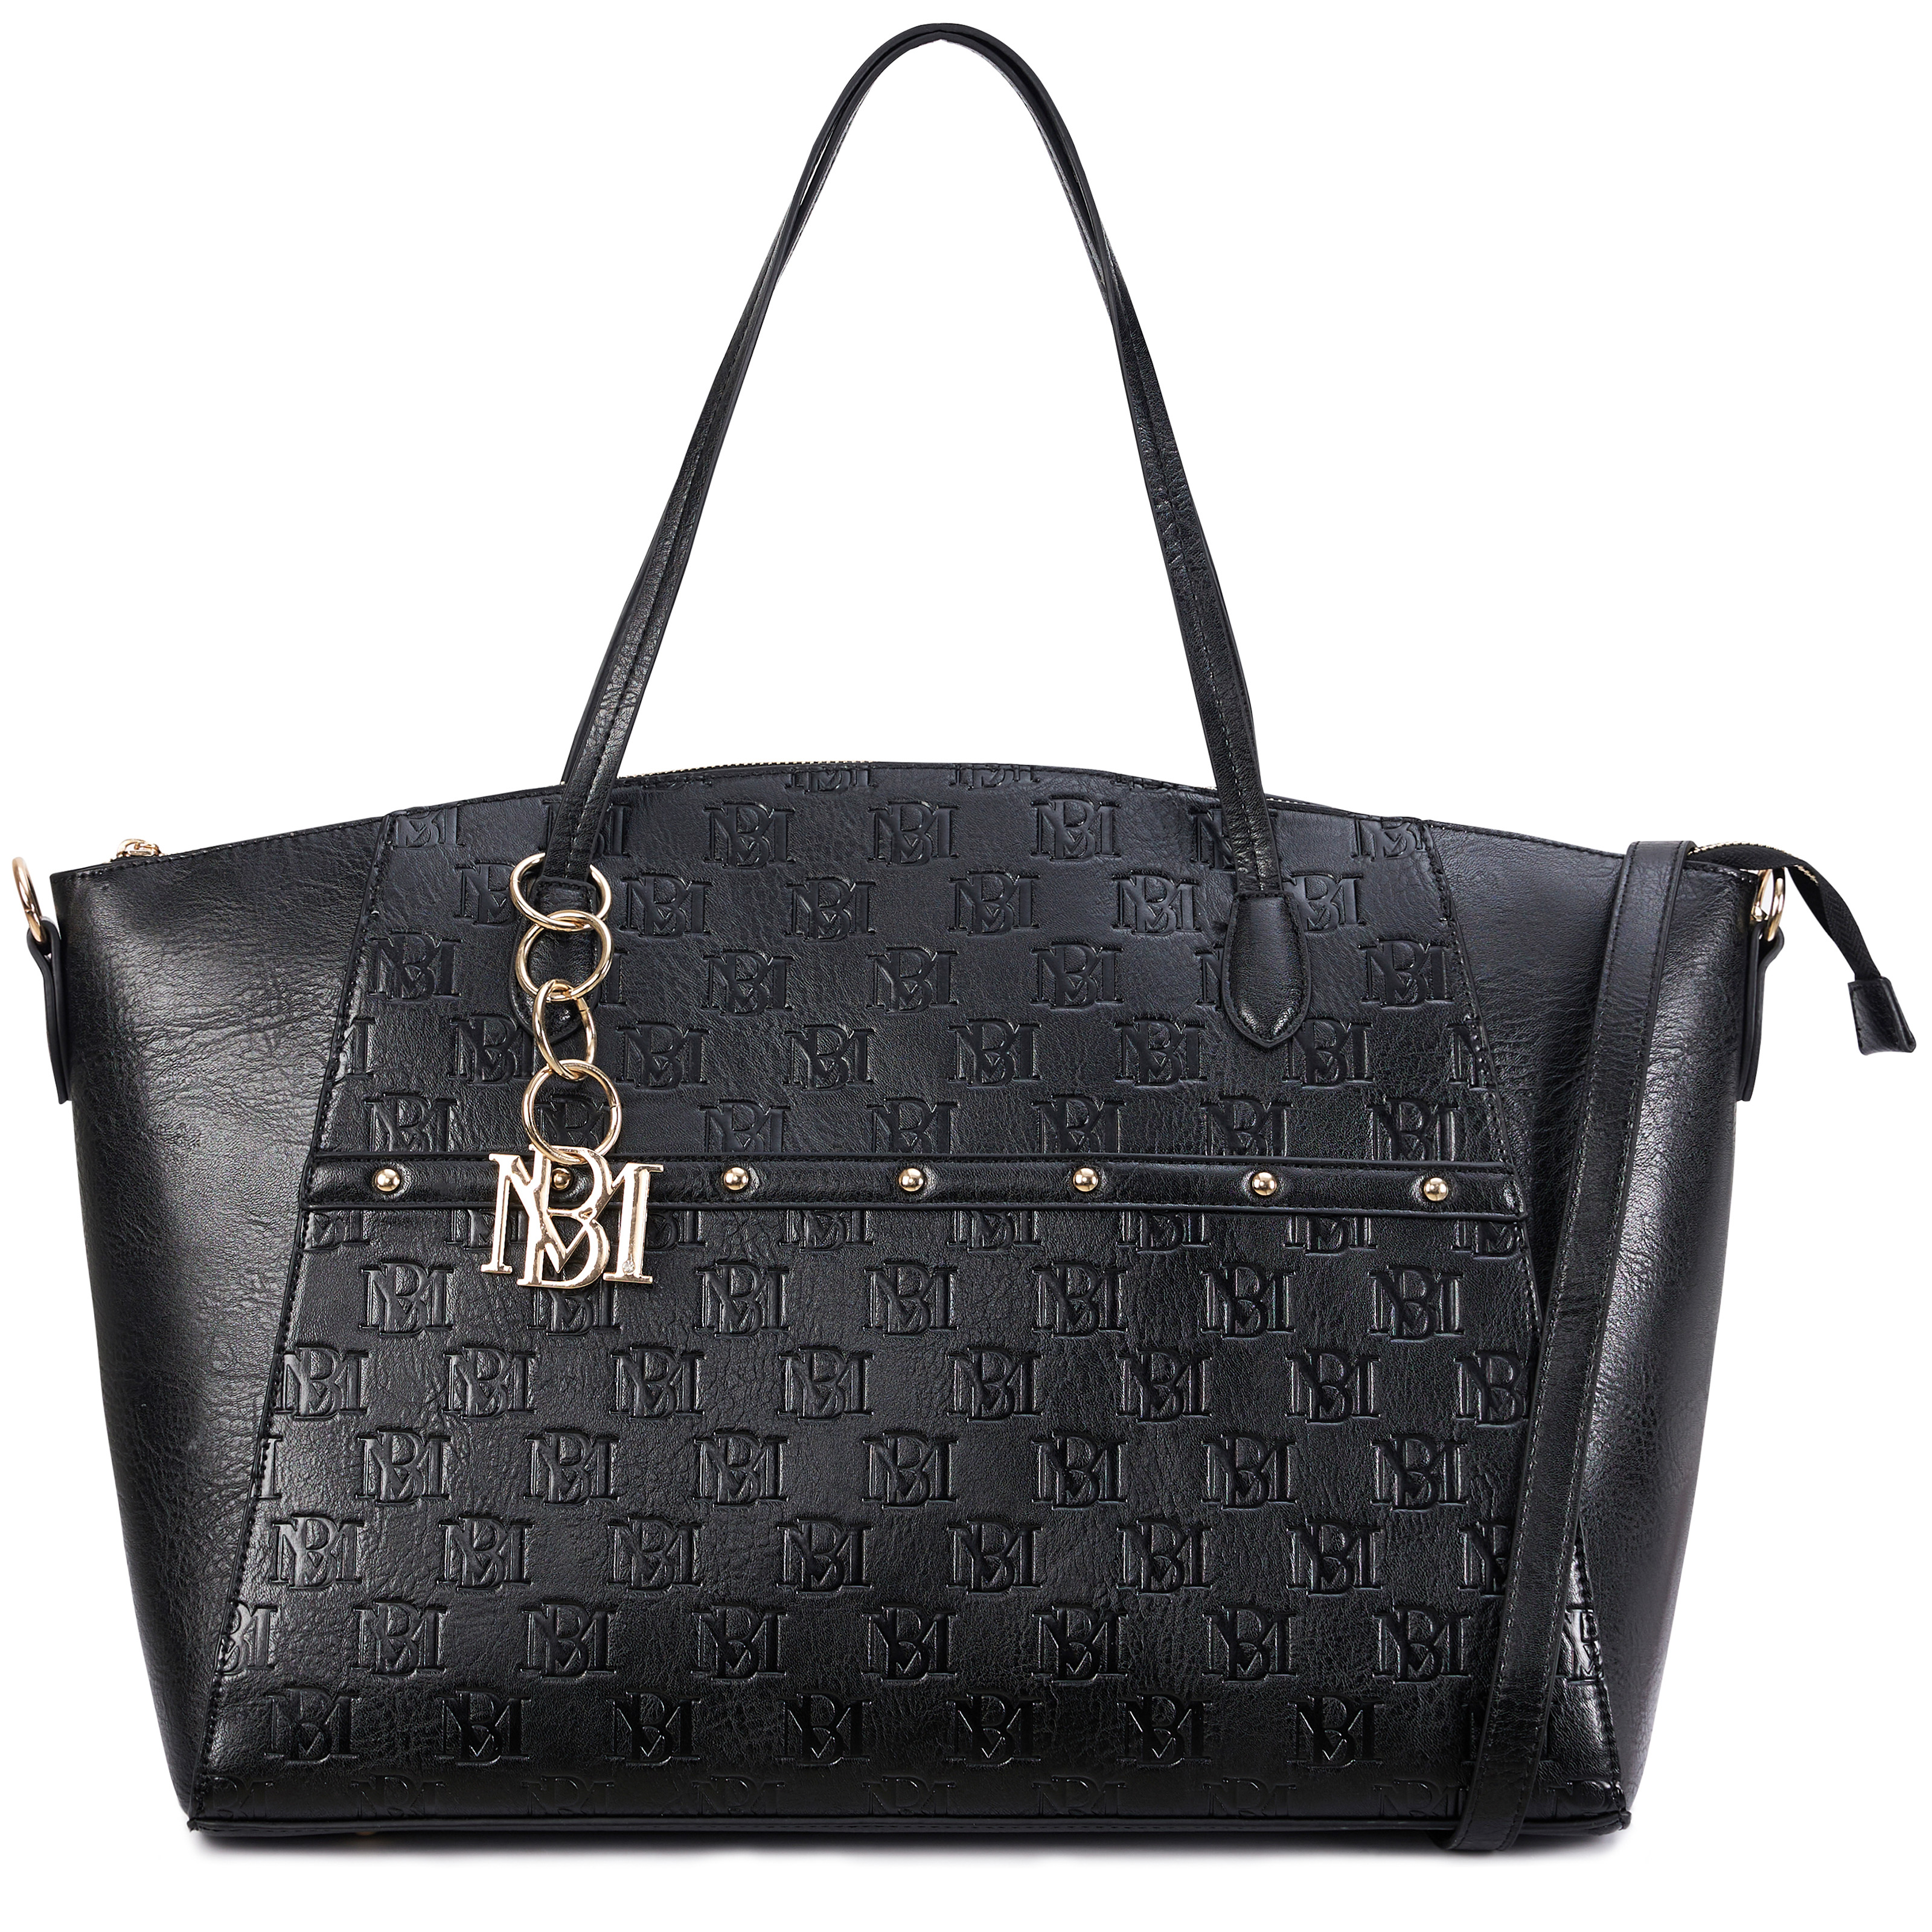 Mulberry Bags: Black Friday Deals You Won't Want To Miss